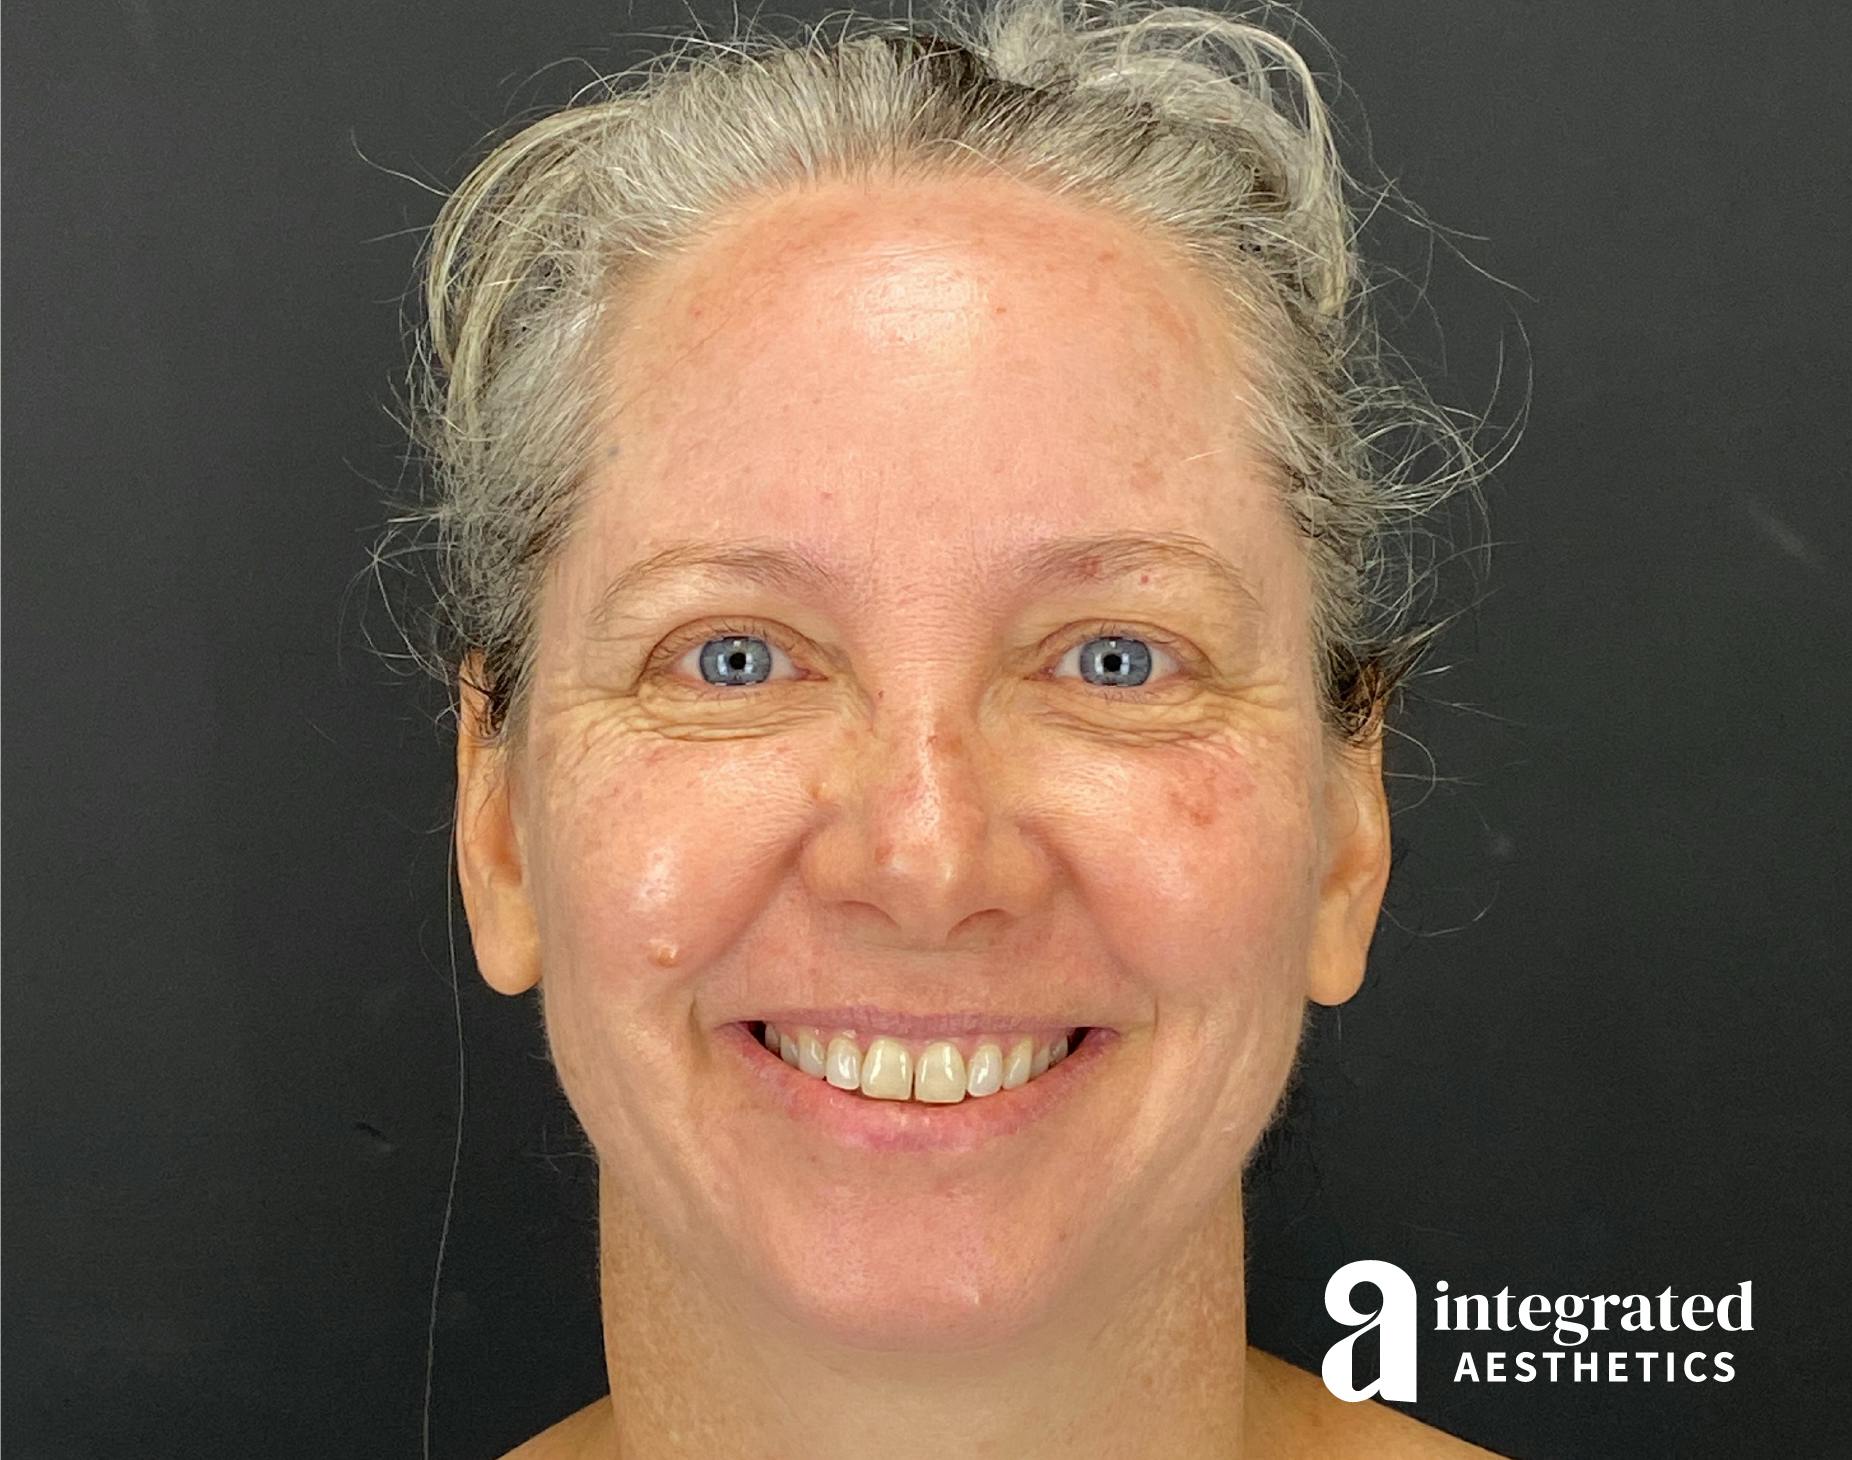 Before & after IPL photofacial treatment at Integrated Aesthetics